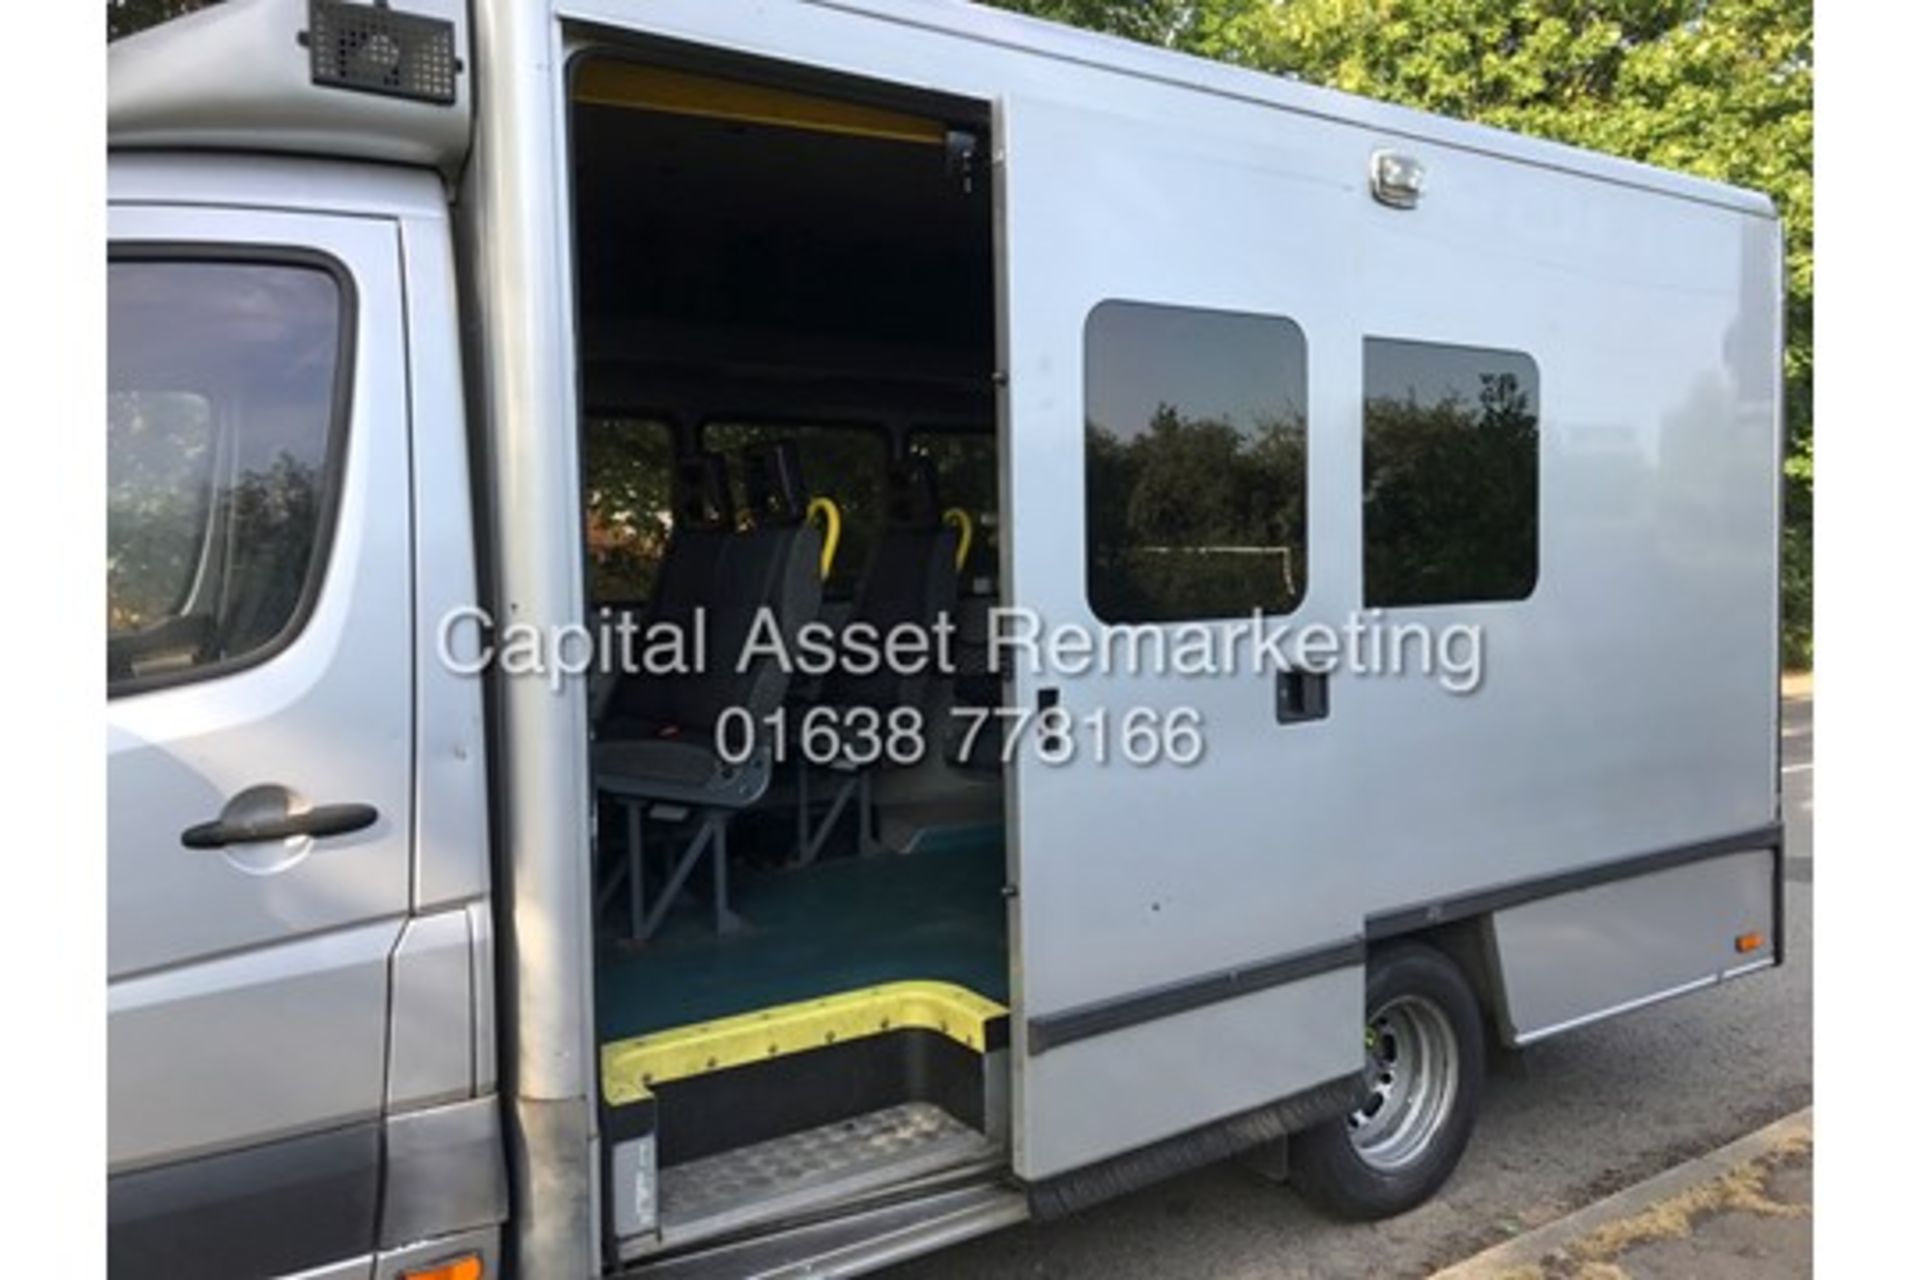 MERCEDES SPRINTER 518CDI "184BHP" AUTO VAN / BUS (08 REG) 1 OWNER -ONLY 64K MILES *IDEAL CONVERSION* - Image 3 of 11